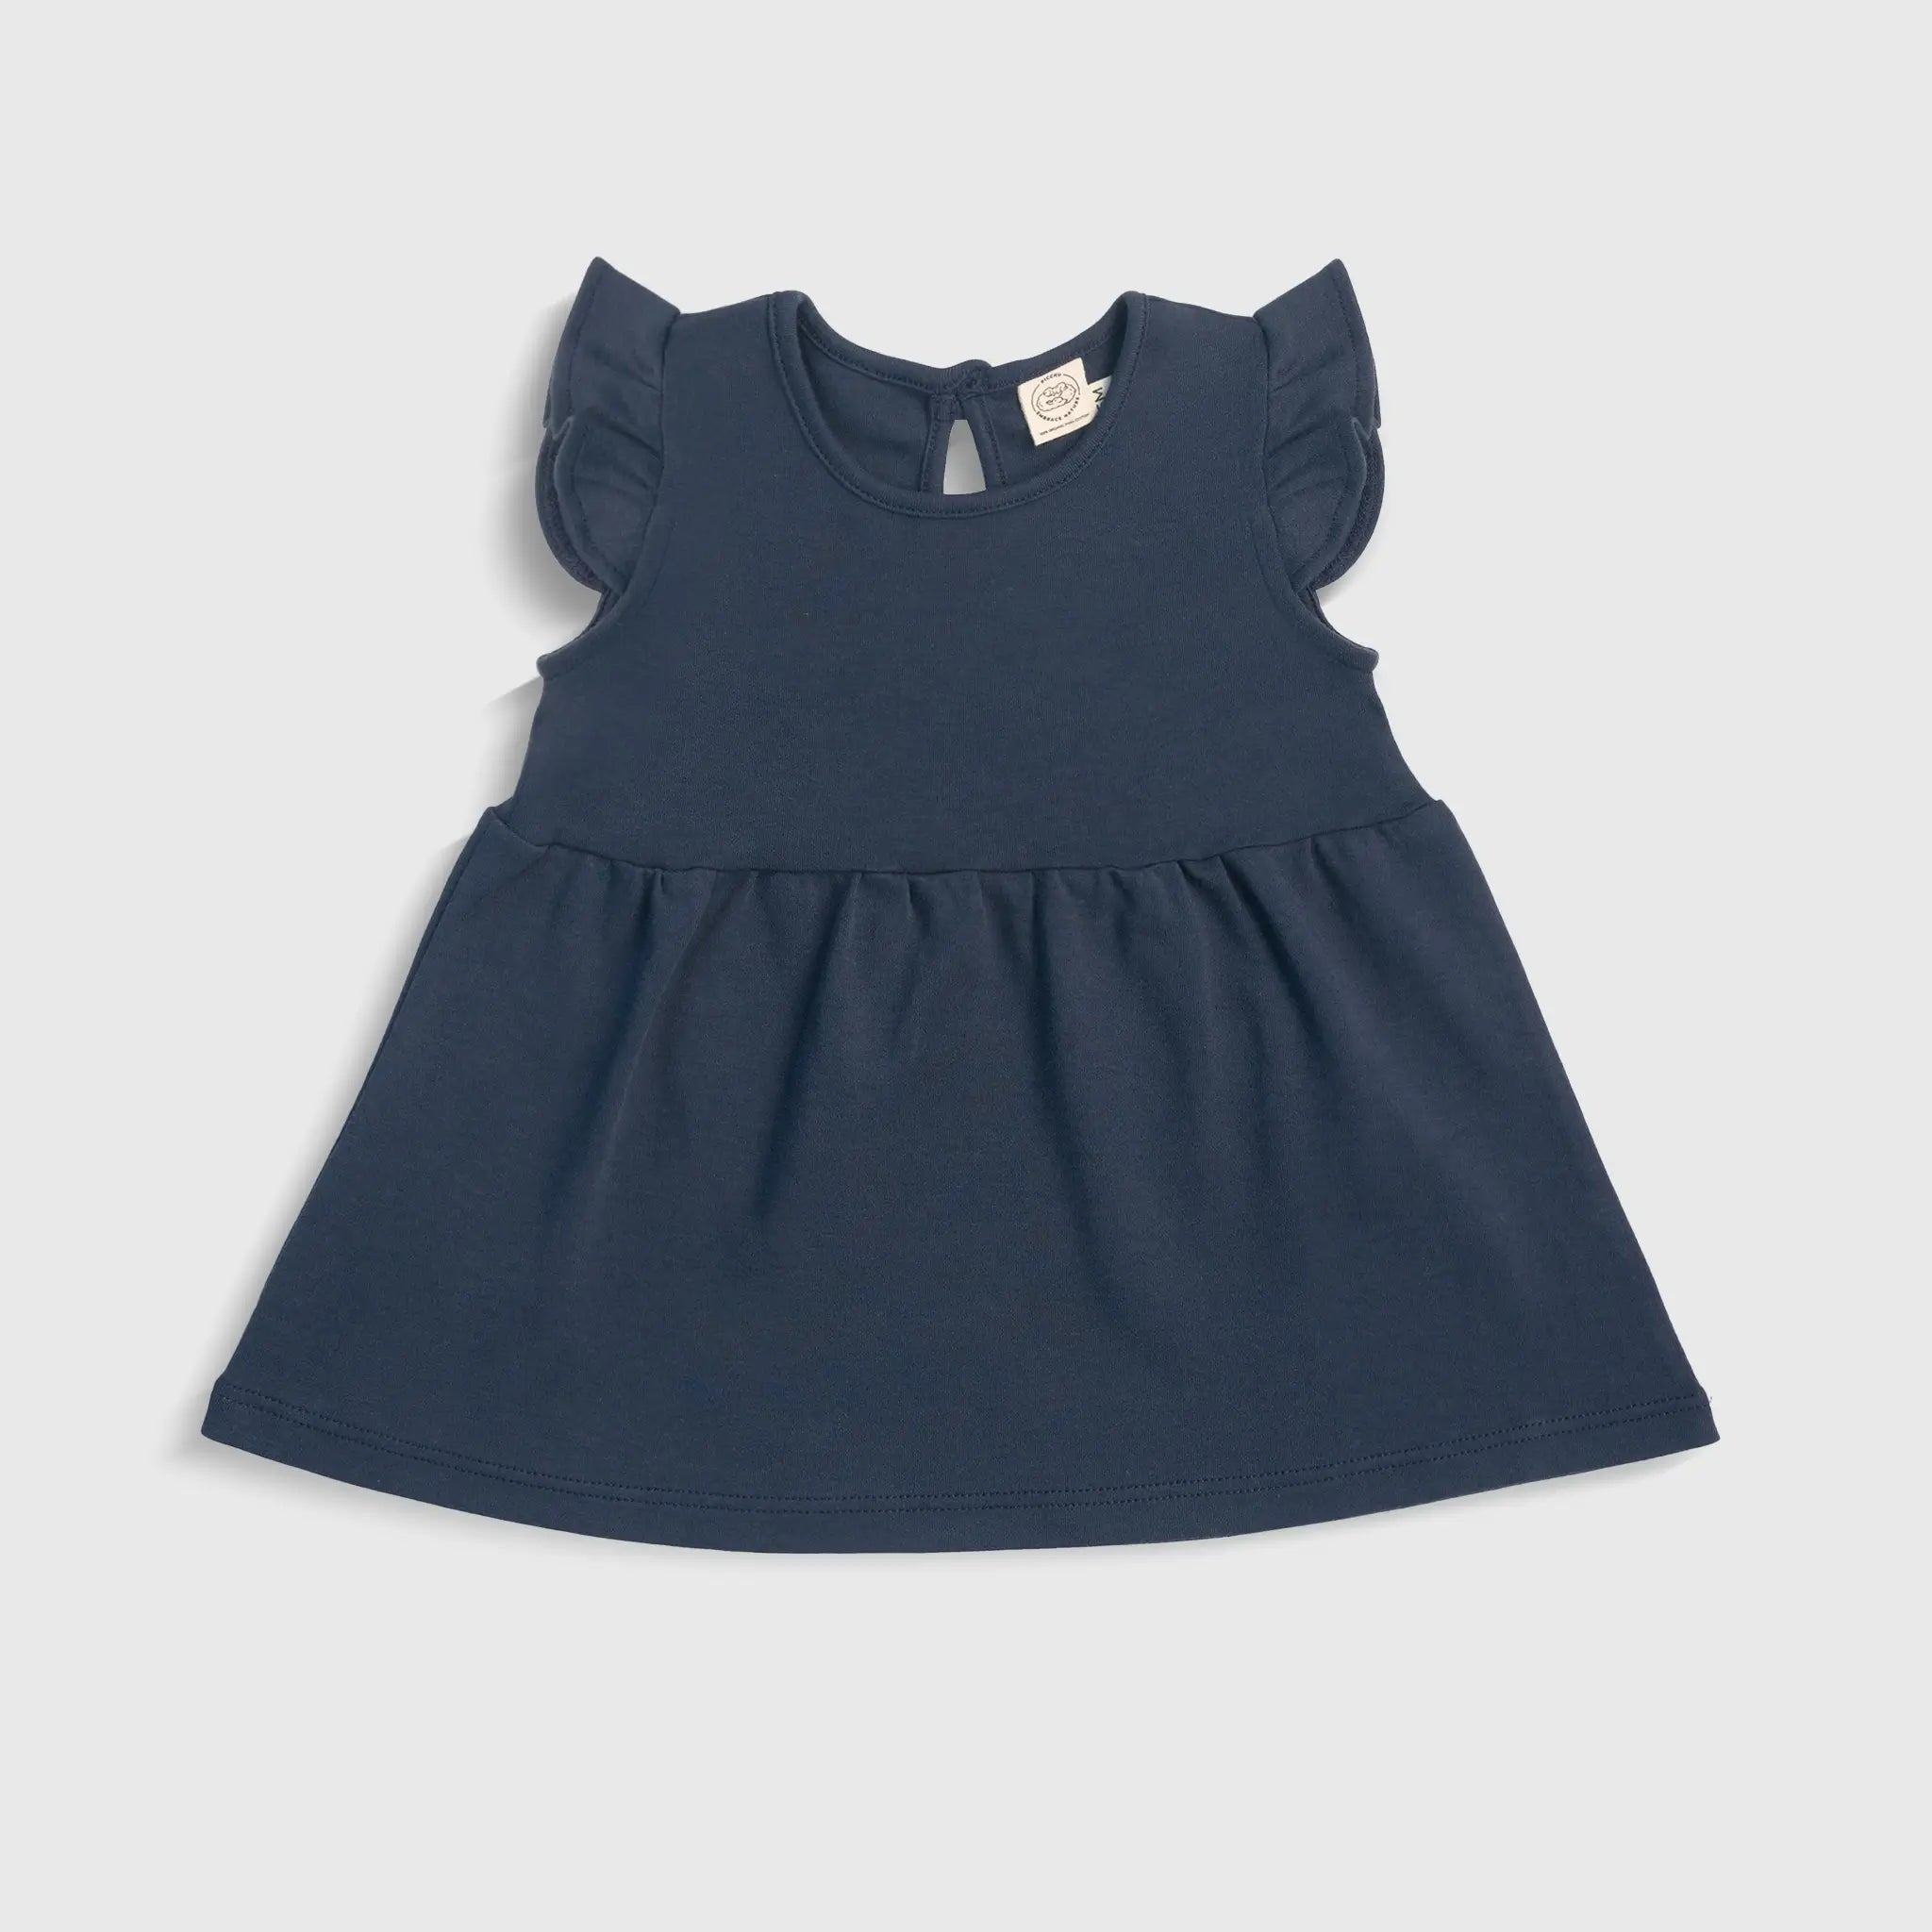 baby girl silky soft dress color navy blue